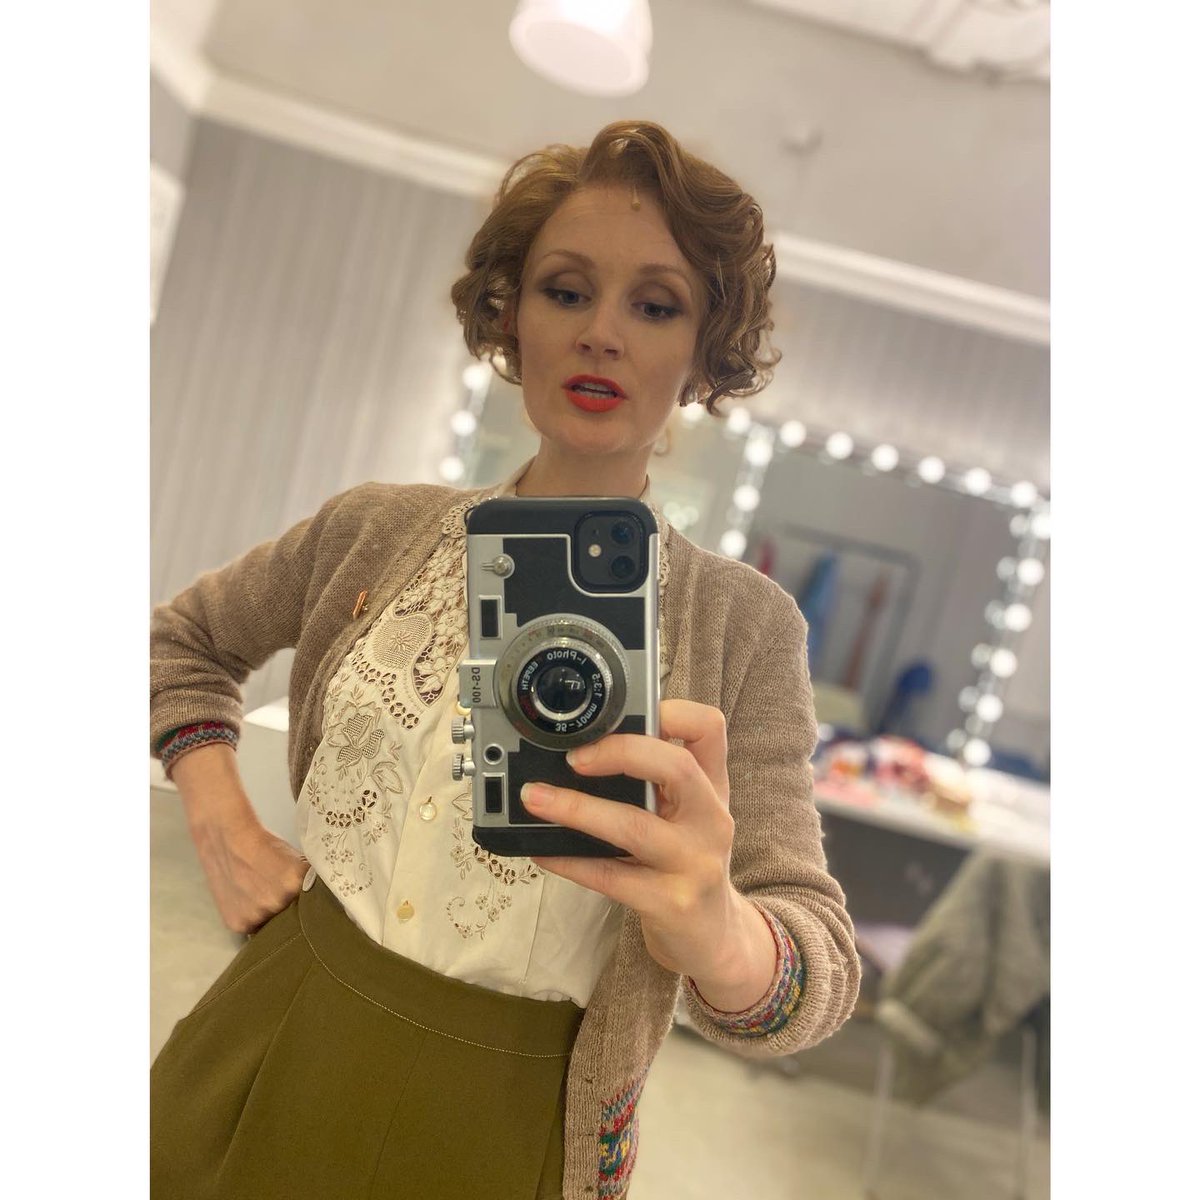 This straight talking redhead got nominated!

Broadway World UK/West End Awards 2022 
BEST PERFORMANCE by an Alternate/Understudy in any play or musical.

If you’d like to vote for me, here’s the link. 

broadwayworld.com/westend/liveup…

#girlfromthenorthcountry #conormcpherson #bobdylan